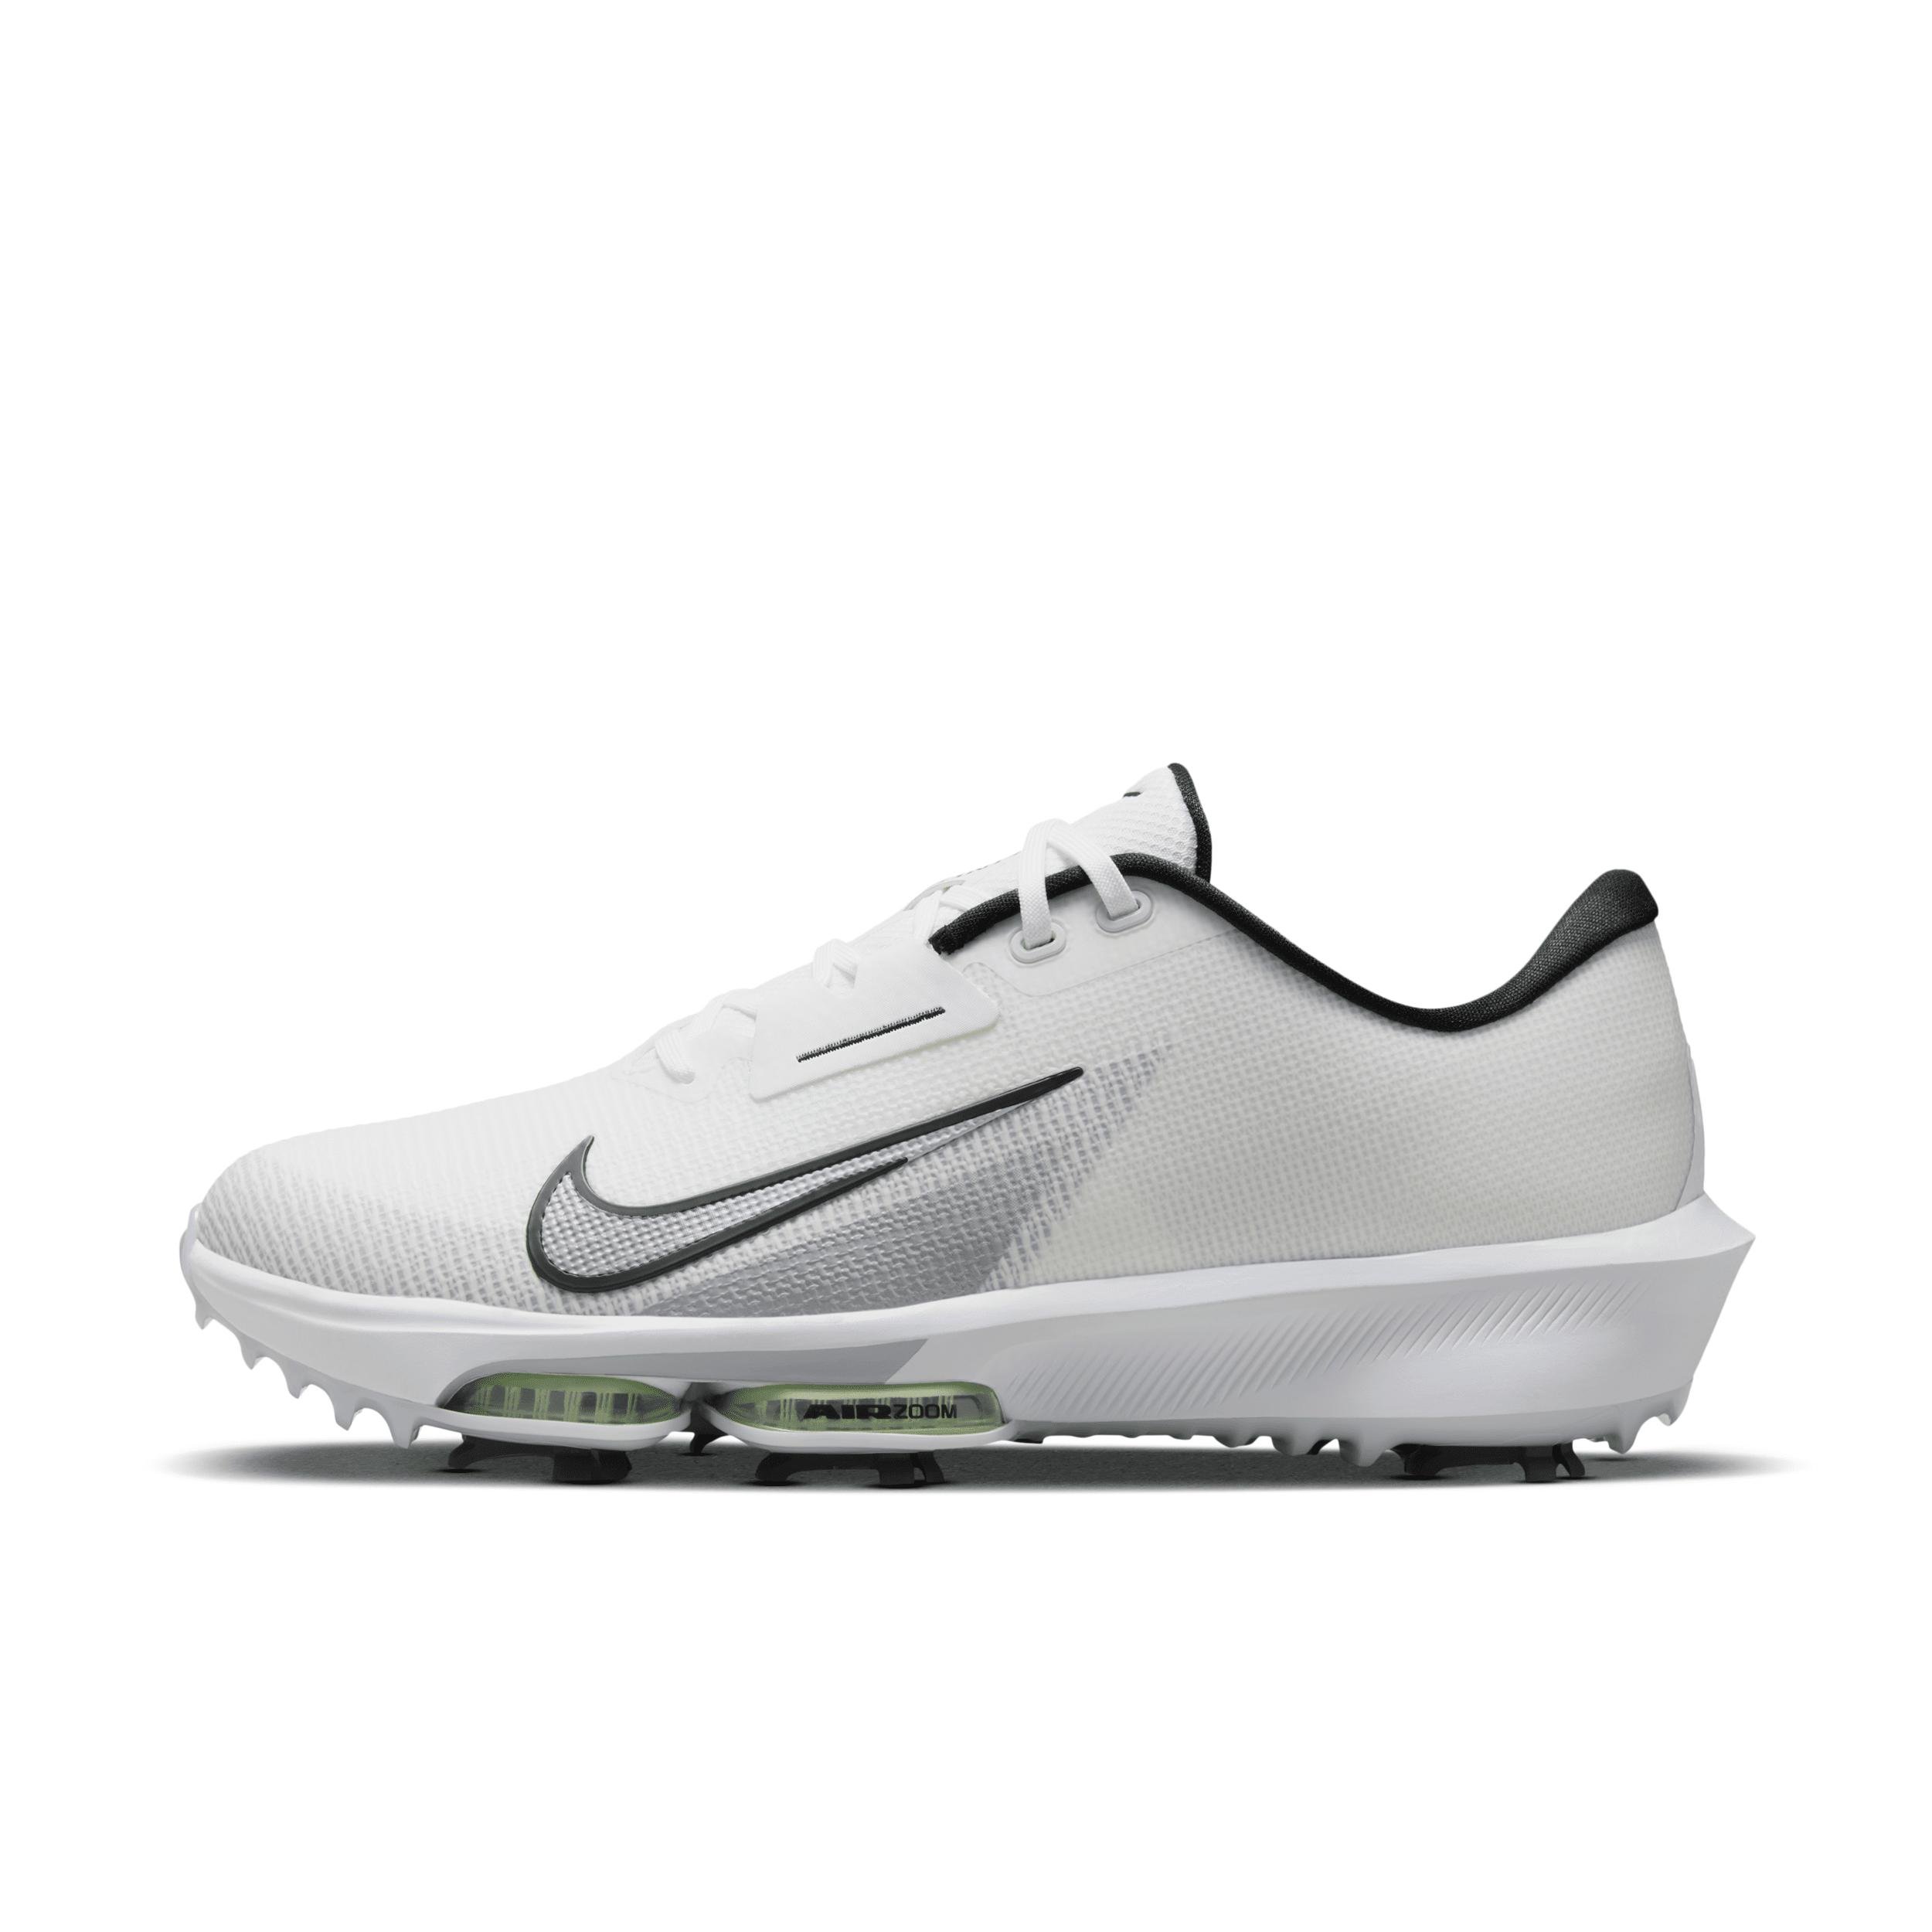 Nike Men's Infinity Tour 2 Golf Shoes by NIKE